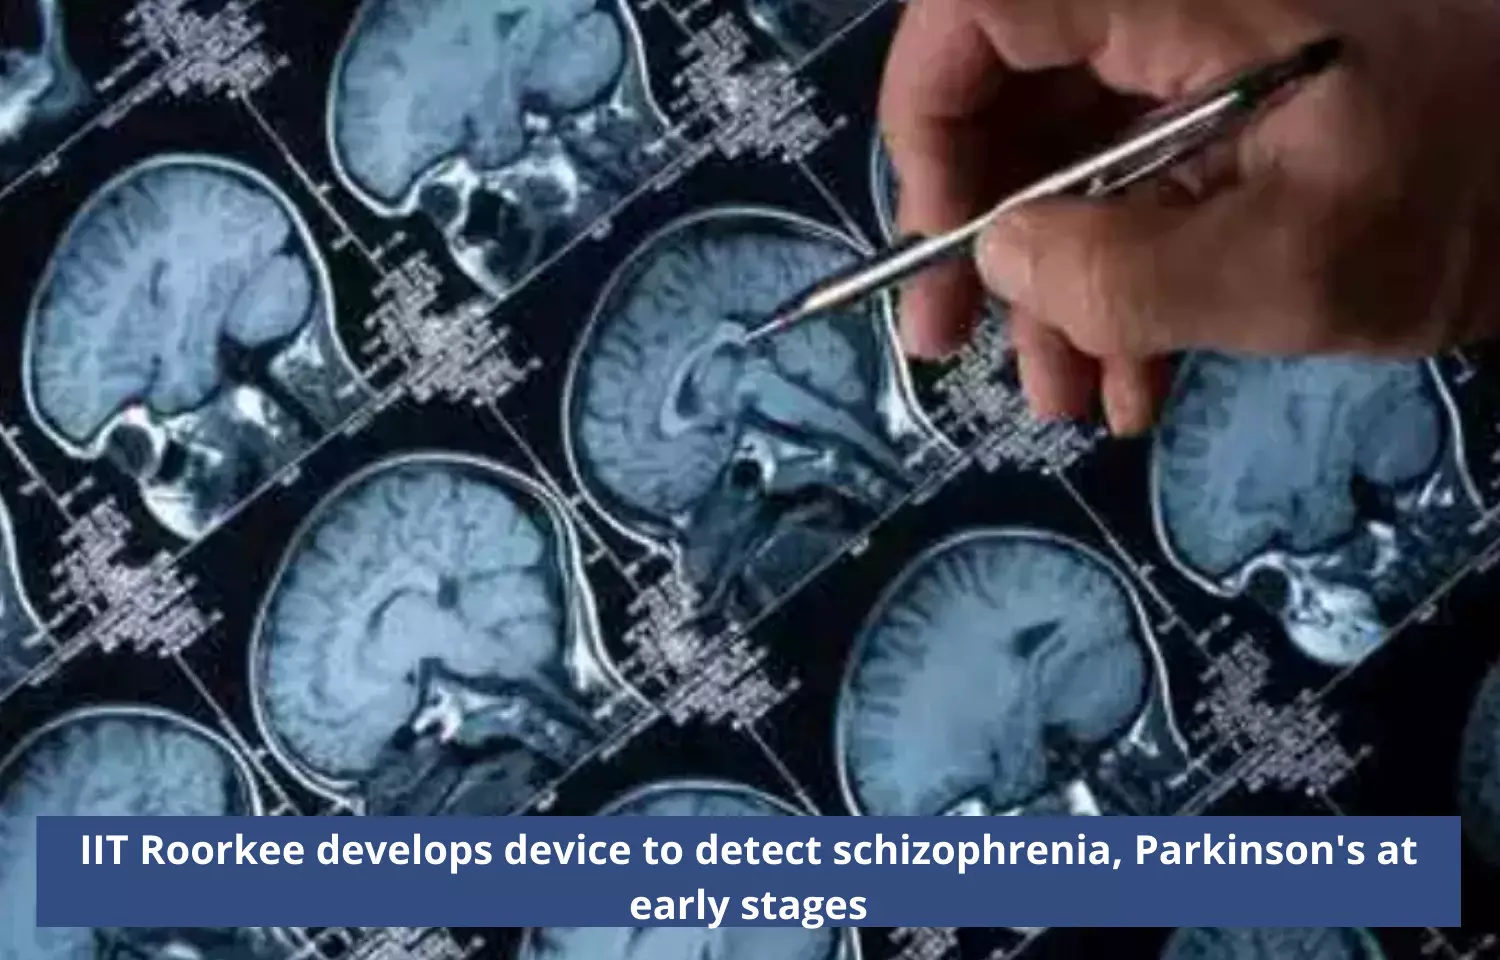 IIT Roorkee develops device to detect schizophrenia, Parkinsons at early stages